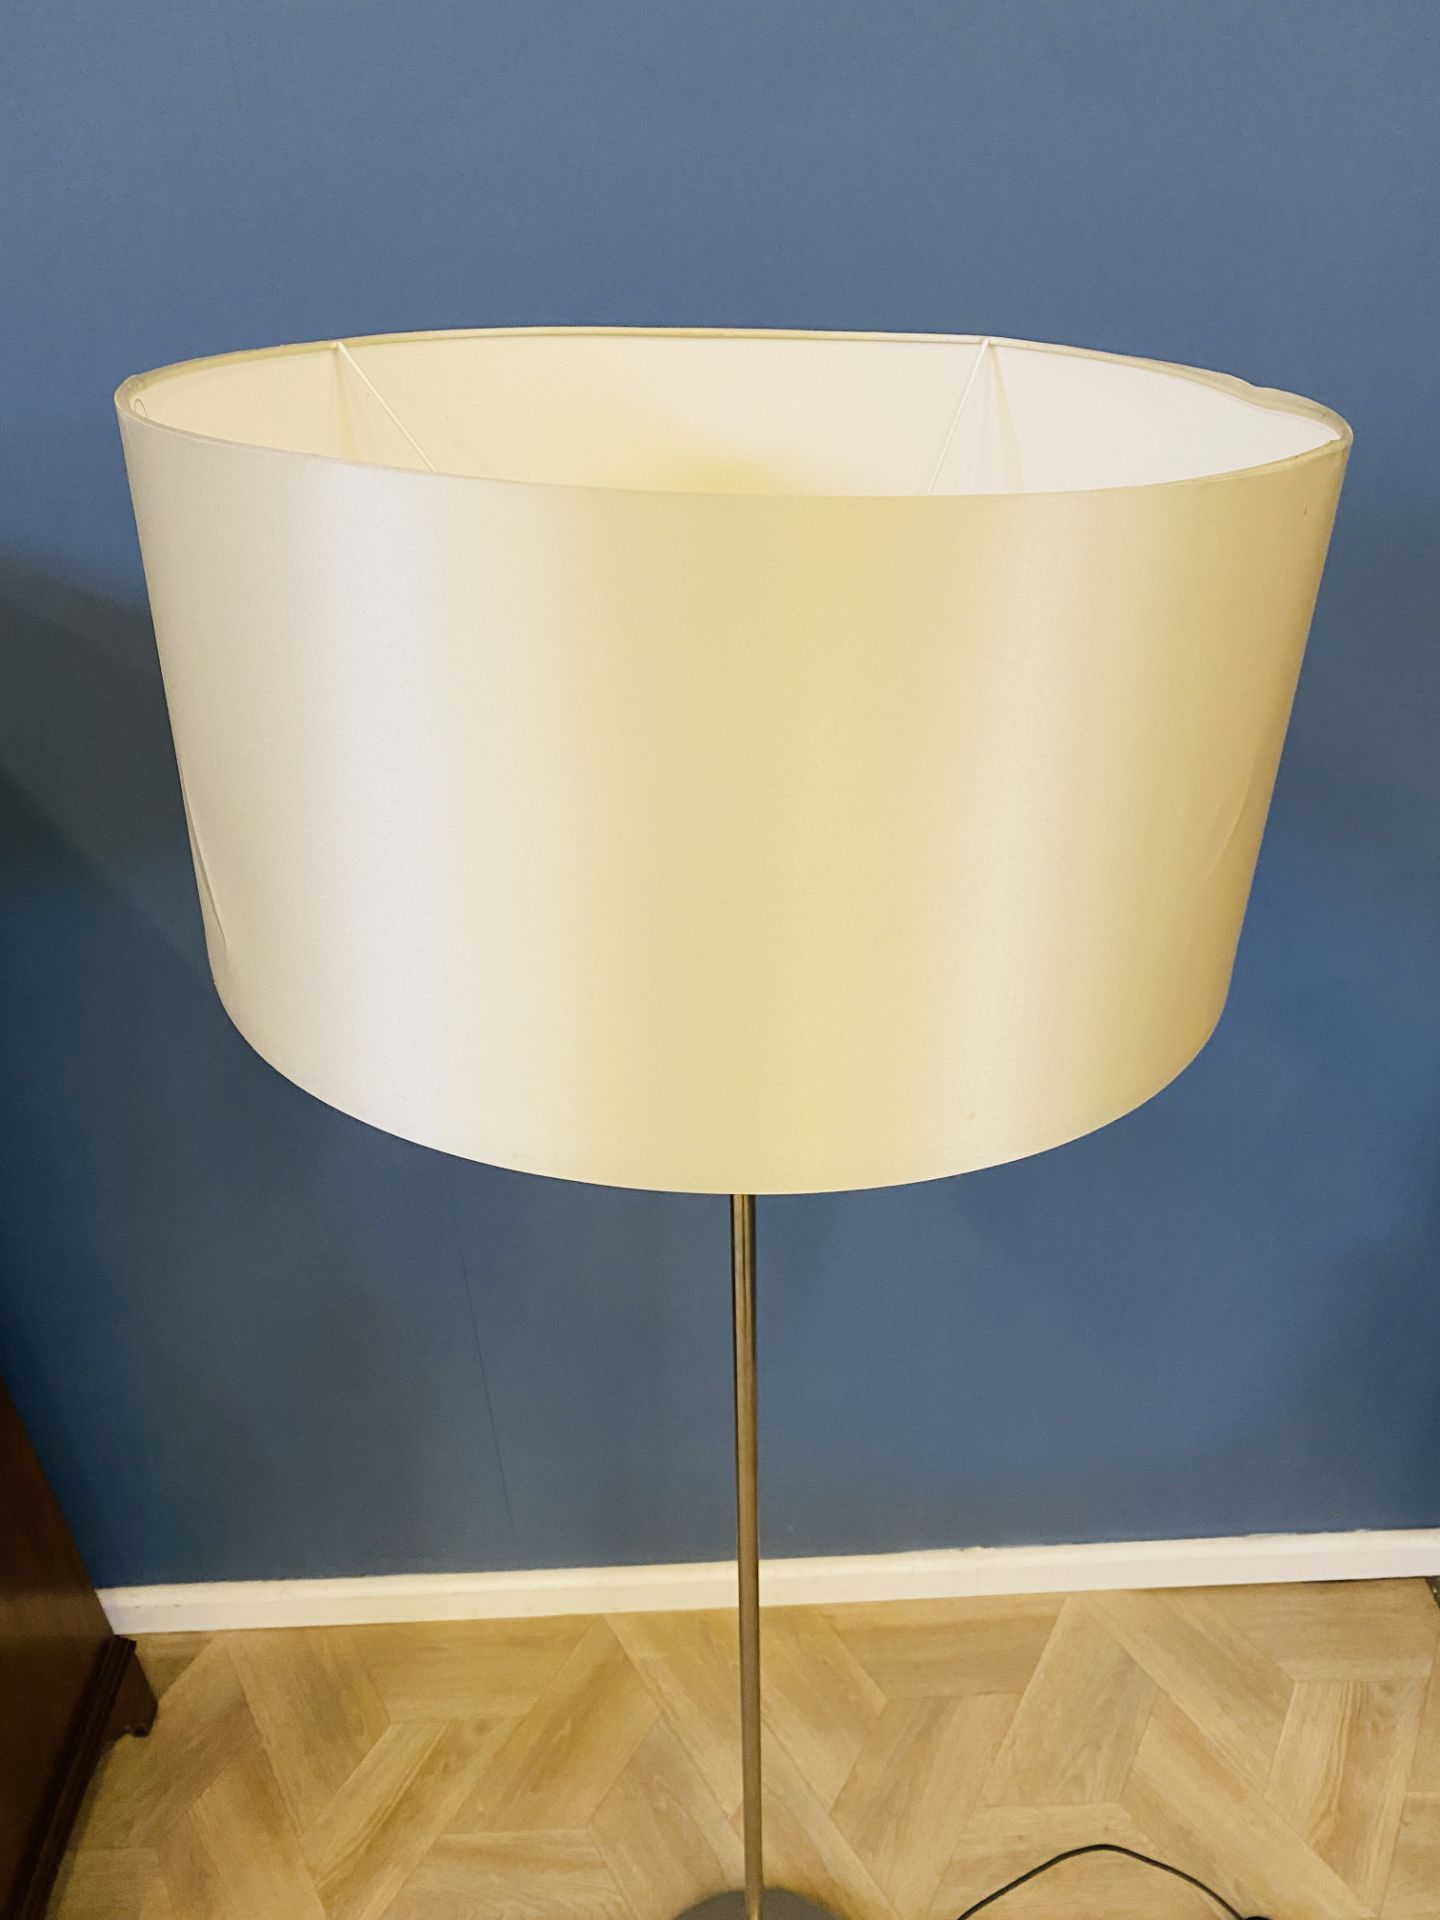 Contemporary standard lamp - Image 3 of 3